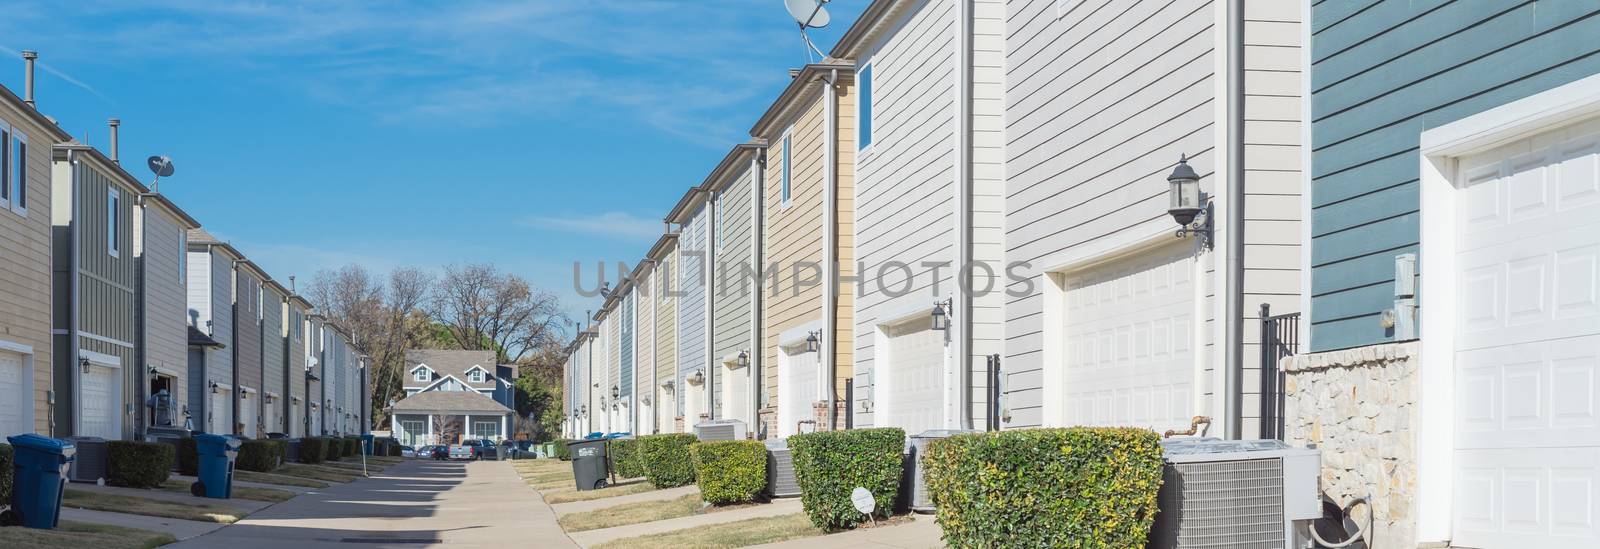 Panorama back alley of new development residential community, line of two-car garage door in Coppell, Texas. Colorful two story houses row well trim landscape near downtown Dallas, outdoor AC units